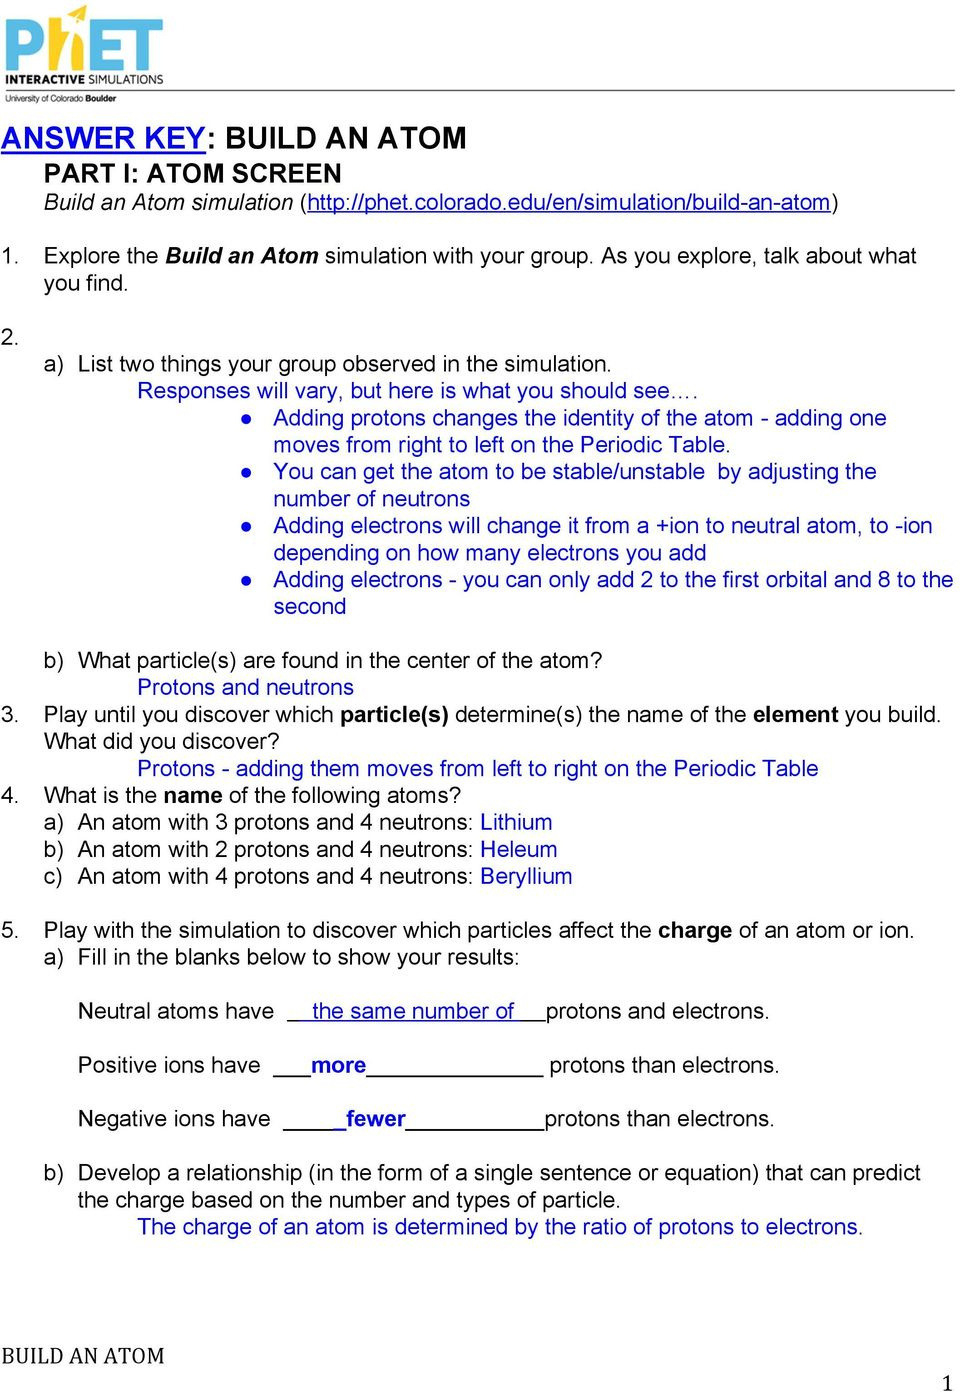 phet-energy-forms-and-changes-interactive-worksheet-by-joellen